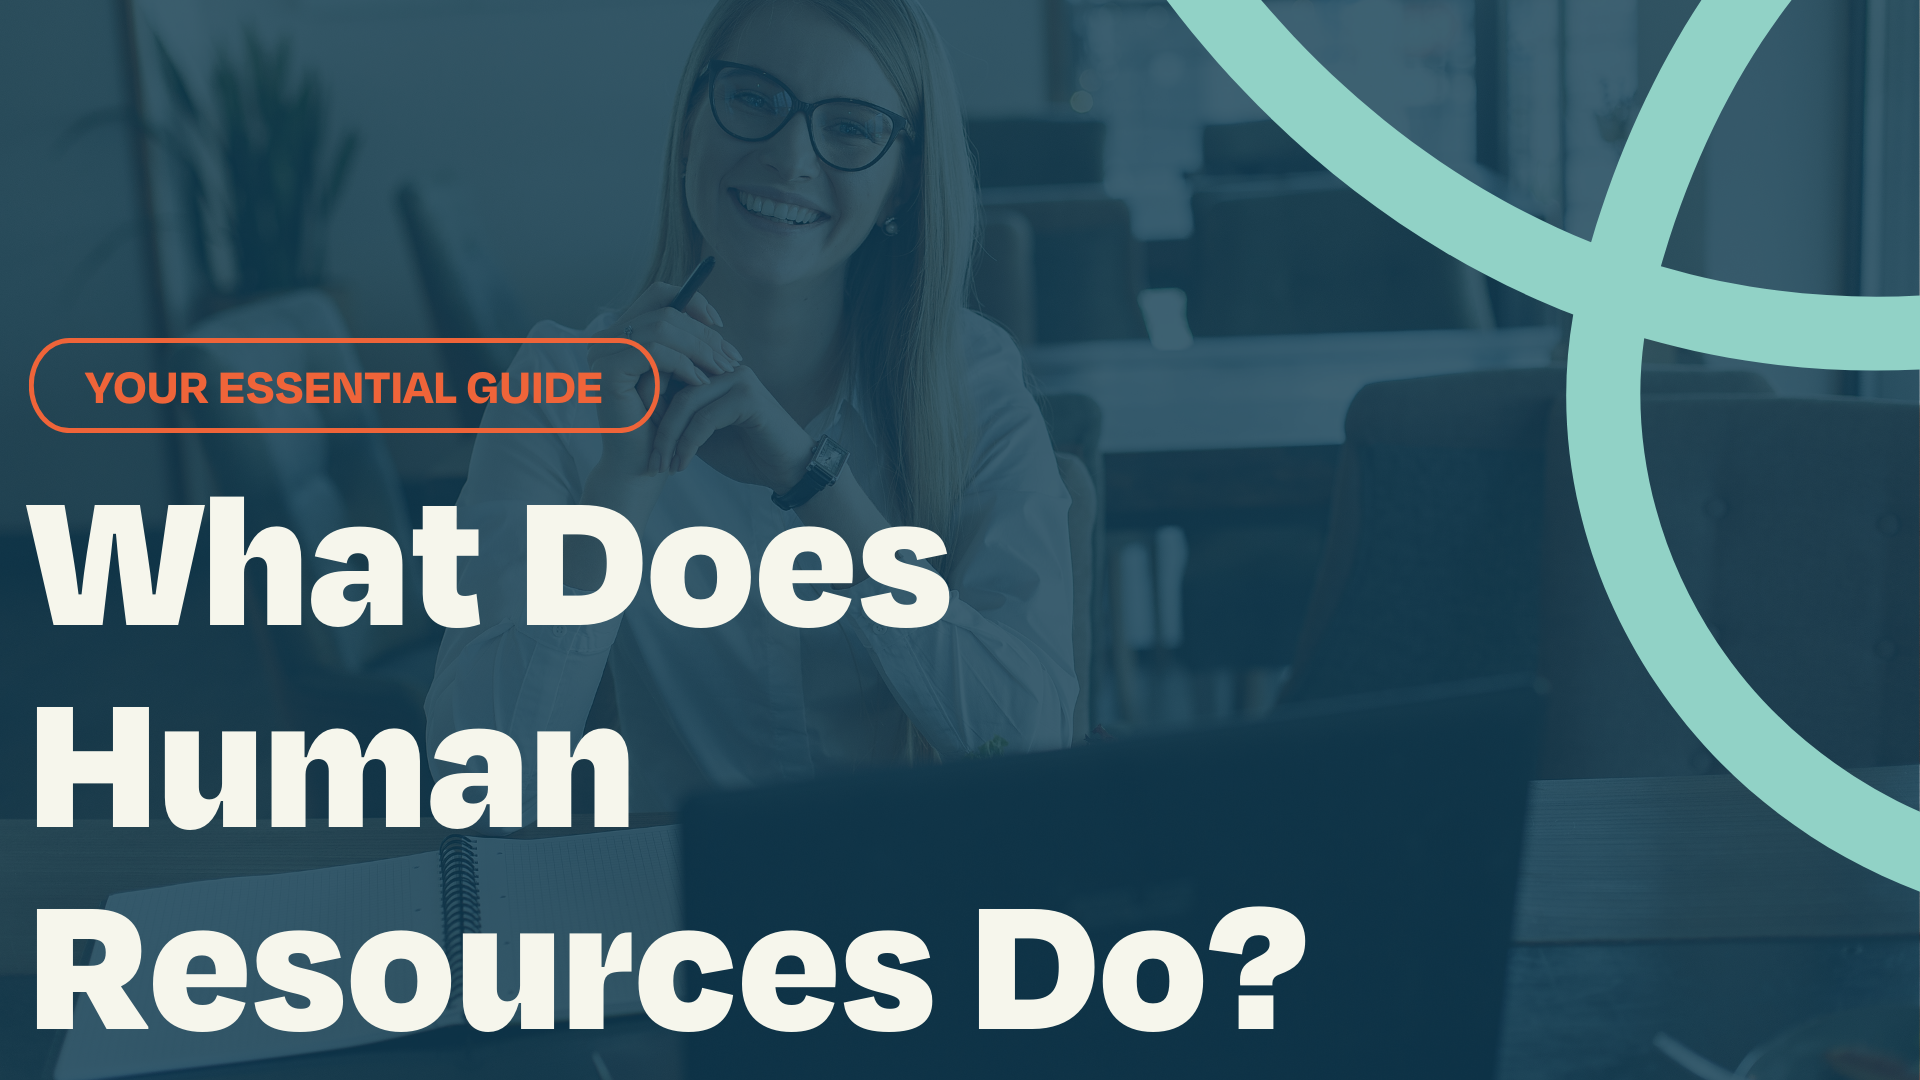 Human Resources Explained: Key Functions and Impact on Your Business